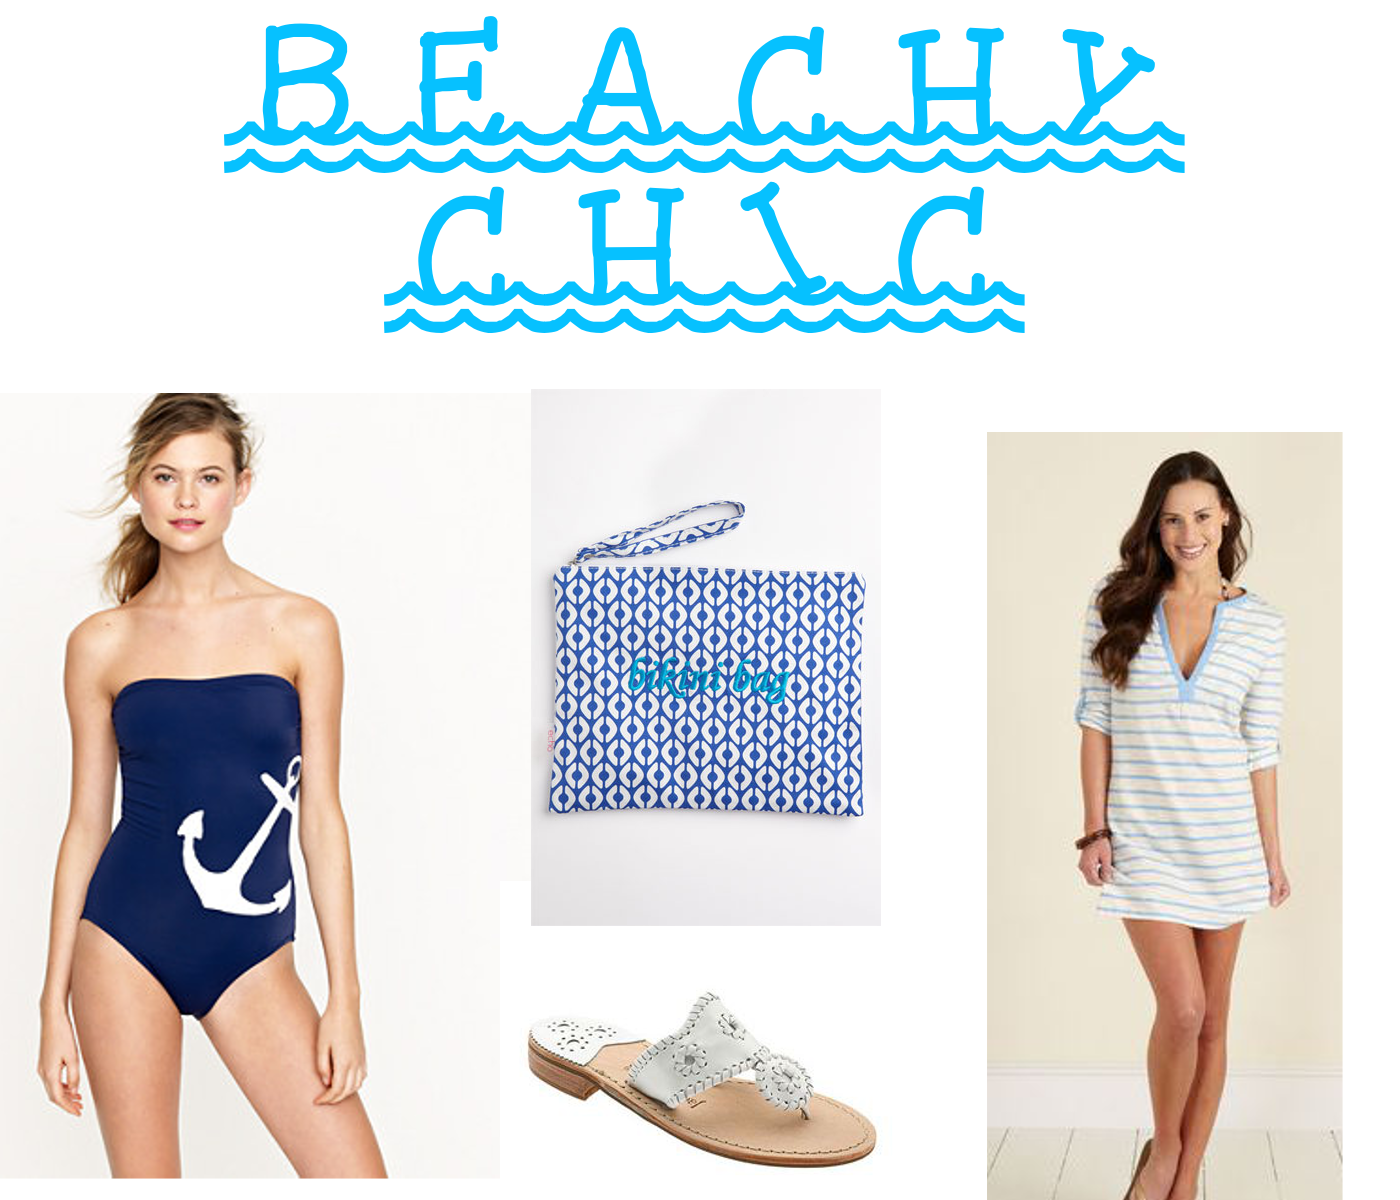 Nautical by Nature: Friday's Fancies: Beachy Chic